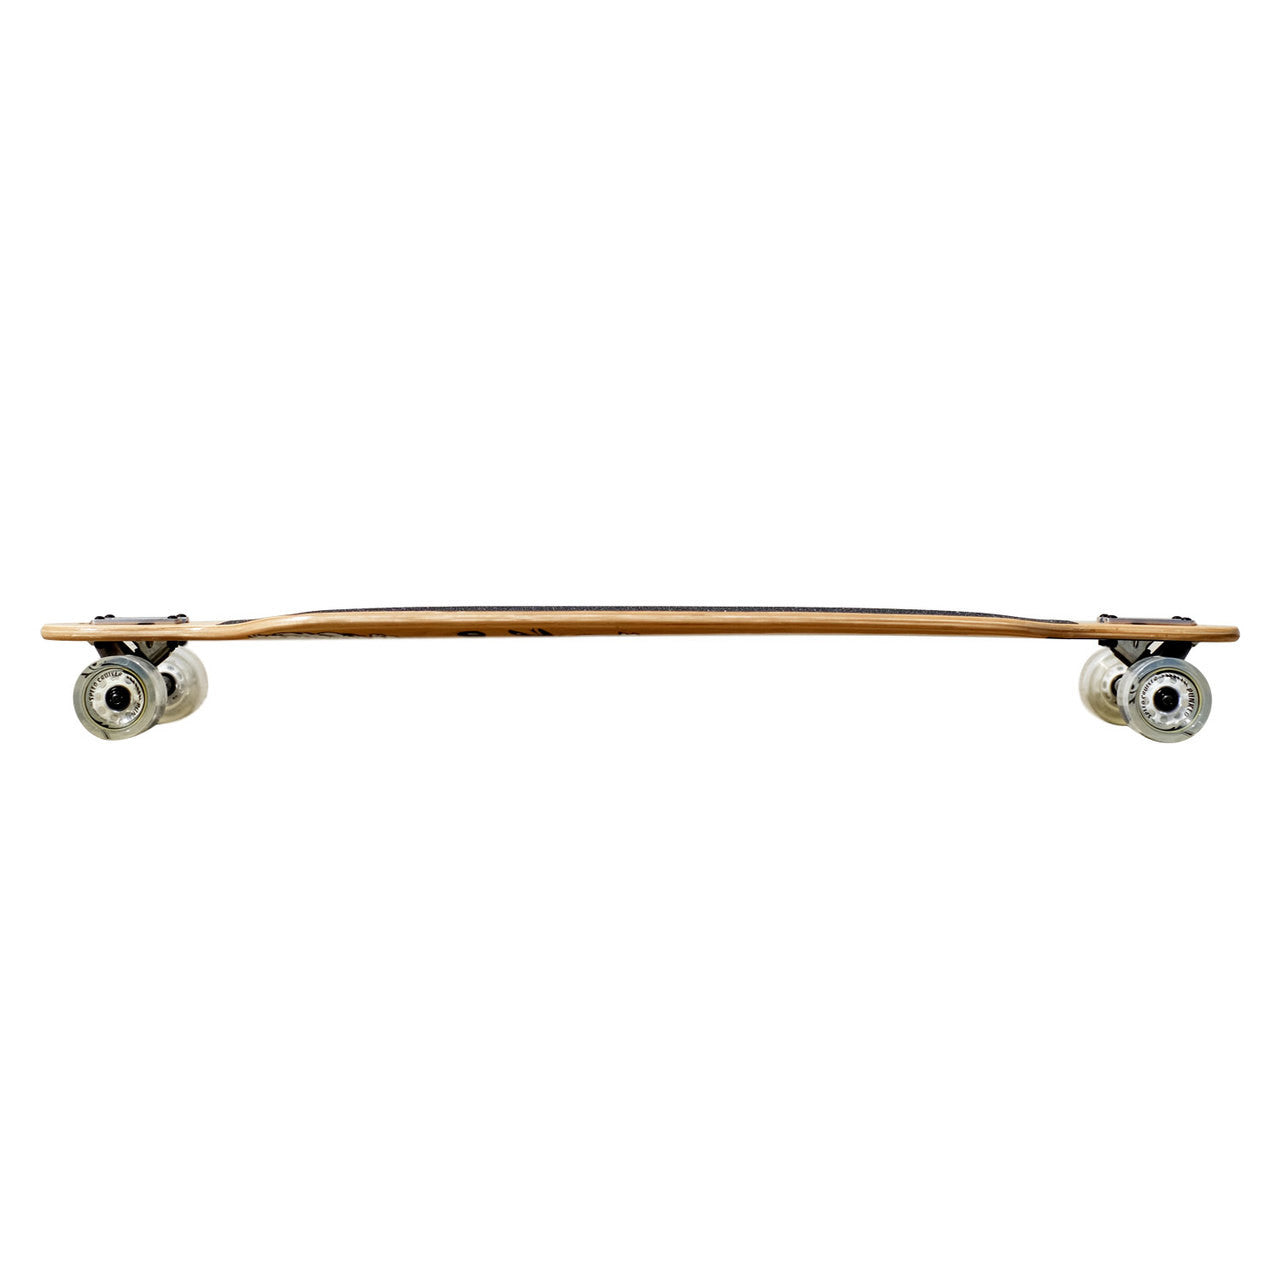 Yocaher Drop Through Longboard Complete - Checker Pink